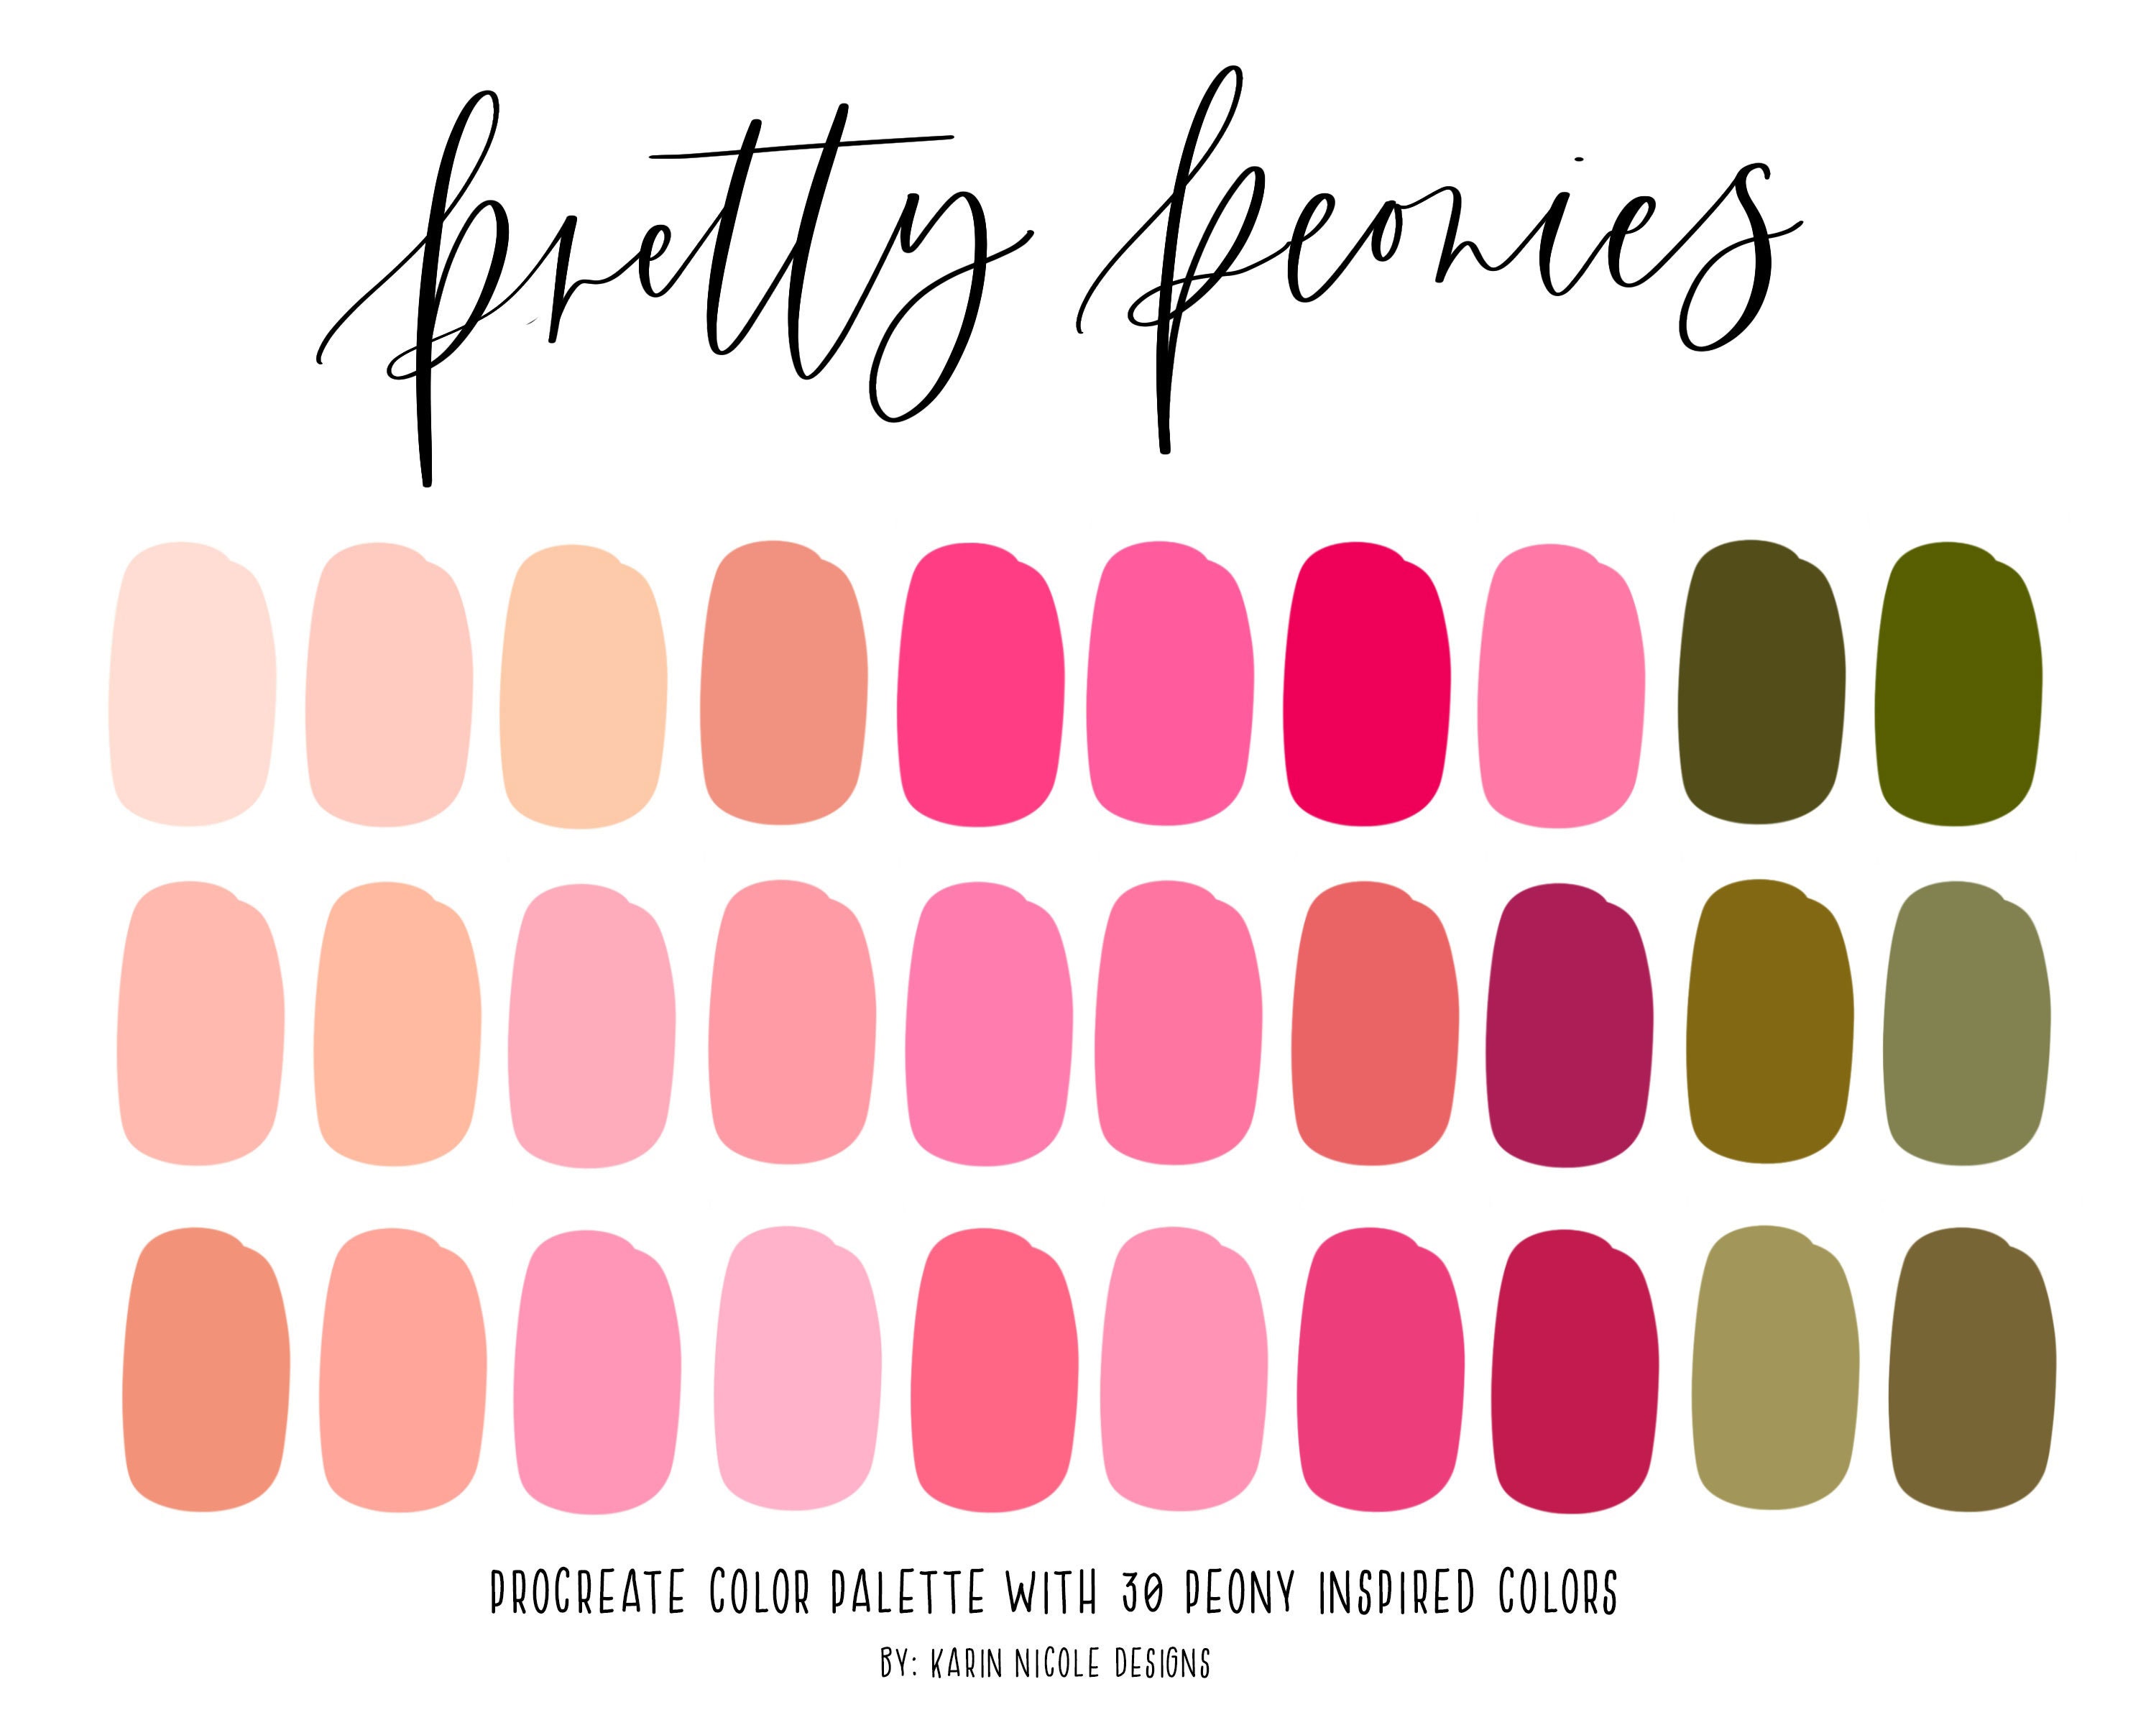 Shades of Pink Procreate Palette | Procreate Swatches | 30 Color Palette